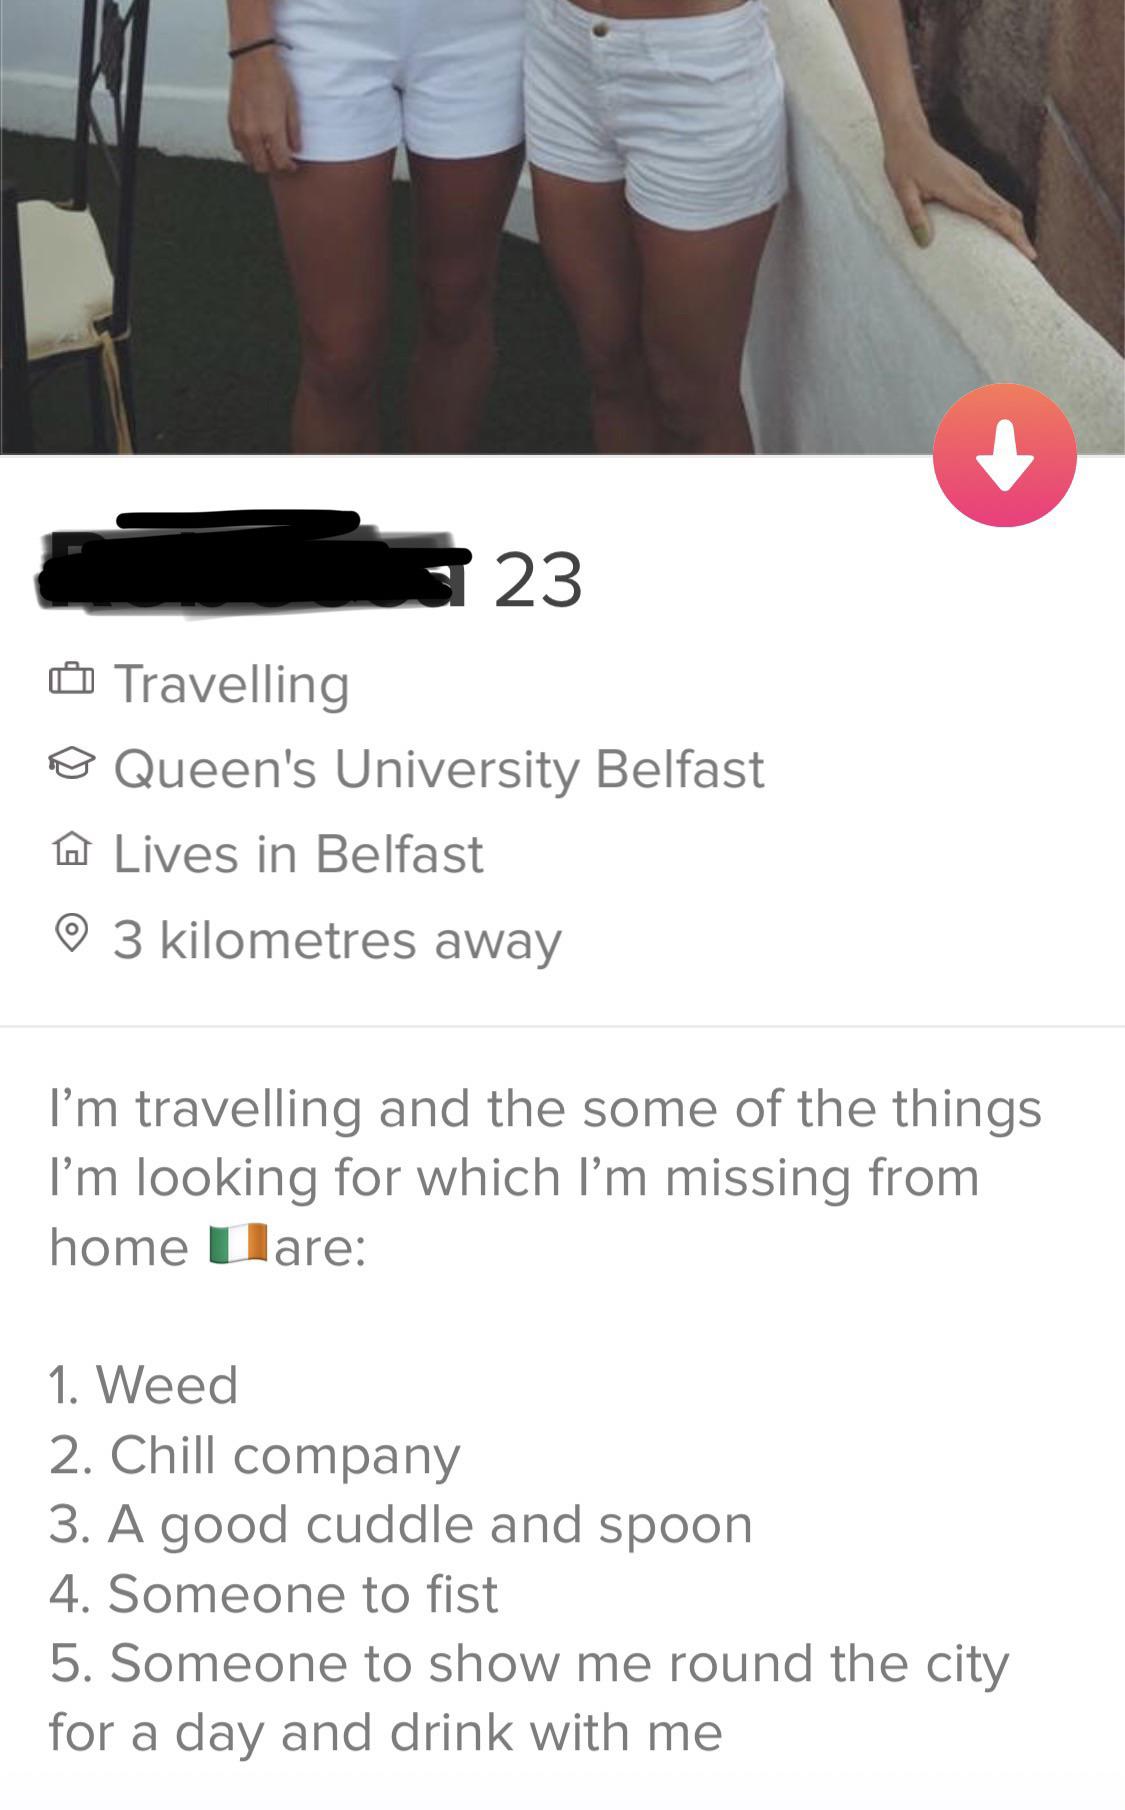 tinder - arm - 323 Travelling o Queen's University Belfast A Lives in Belfast o 3 kilometres away I'm travelling and the some of the things I'm looking for which I'm missing from home Lare 1. Weed 2. Chill company 3. A good cuddle and spoon 4. Someone to 